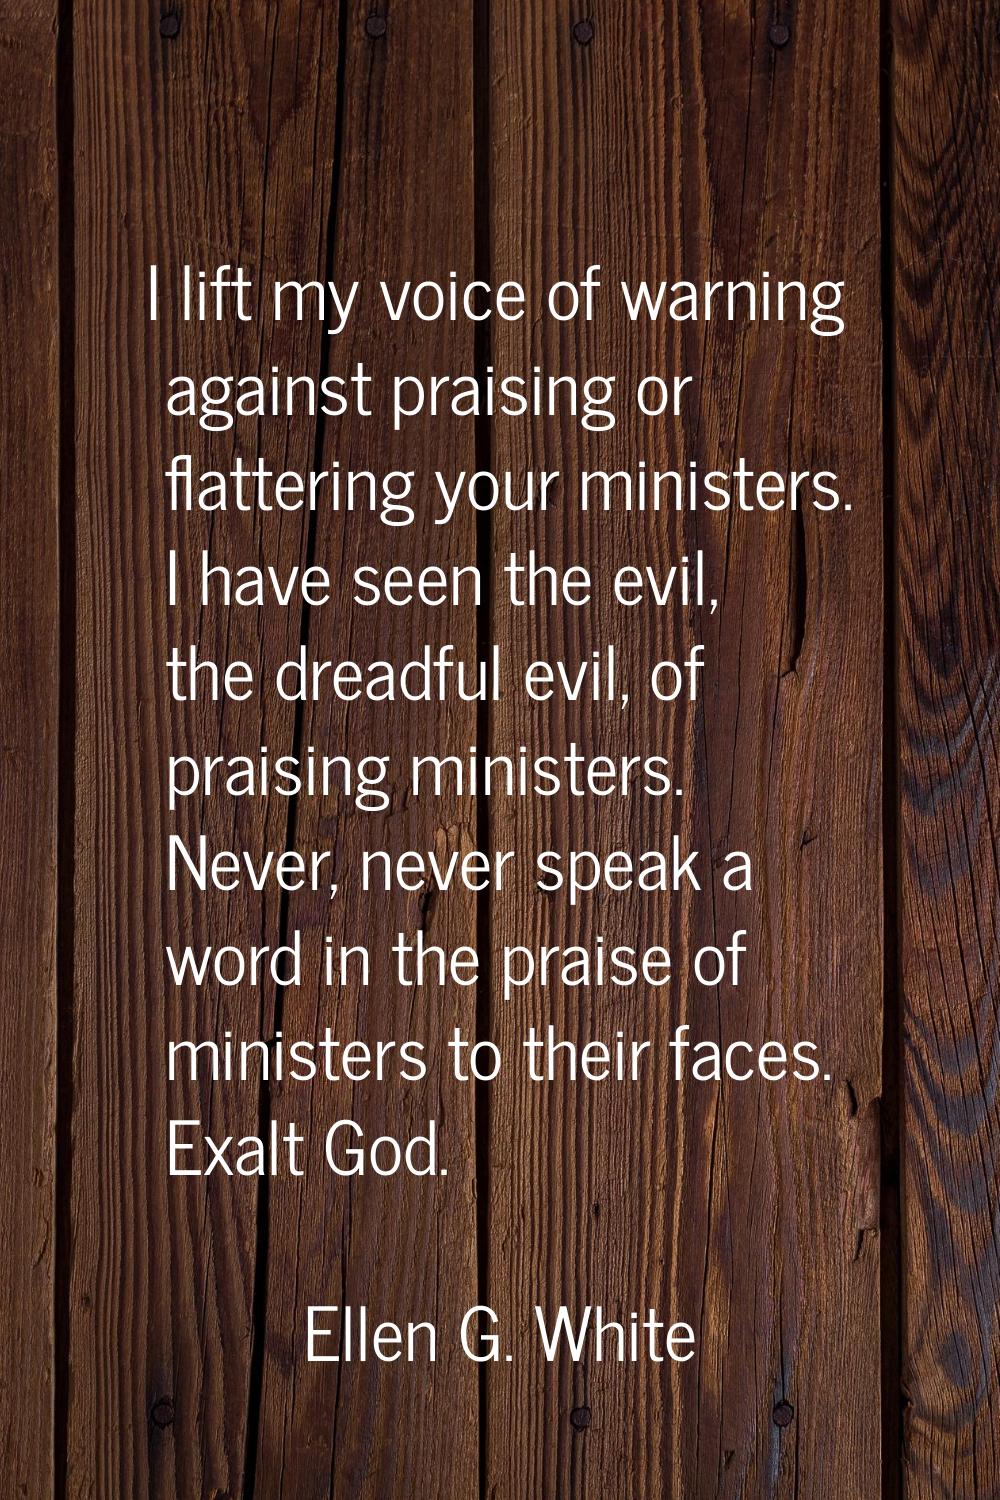 I lift my voice of warning against praising or flattering your ministers. I have seen the evil, the